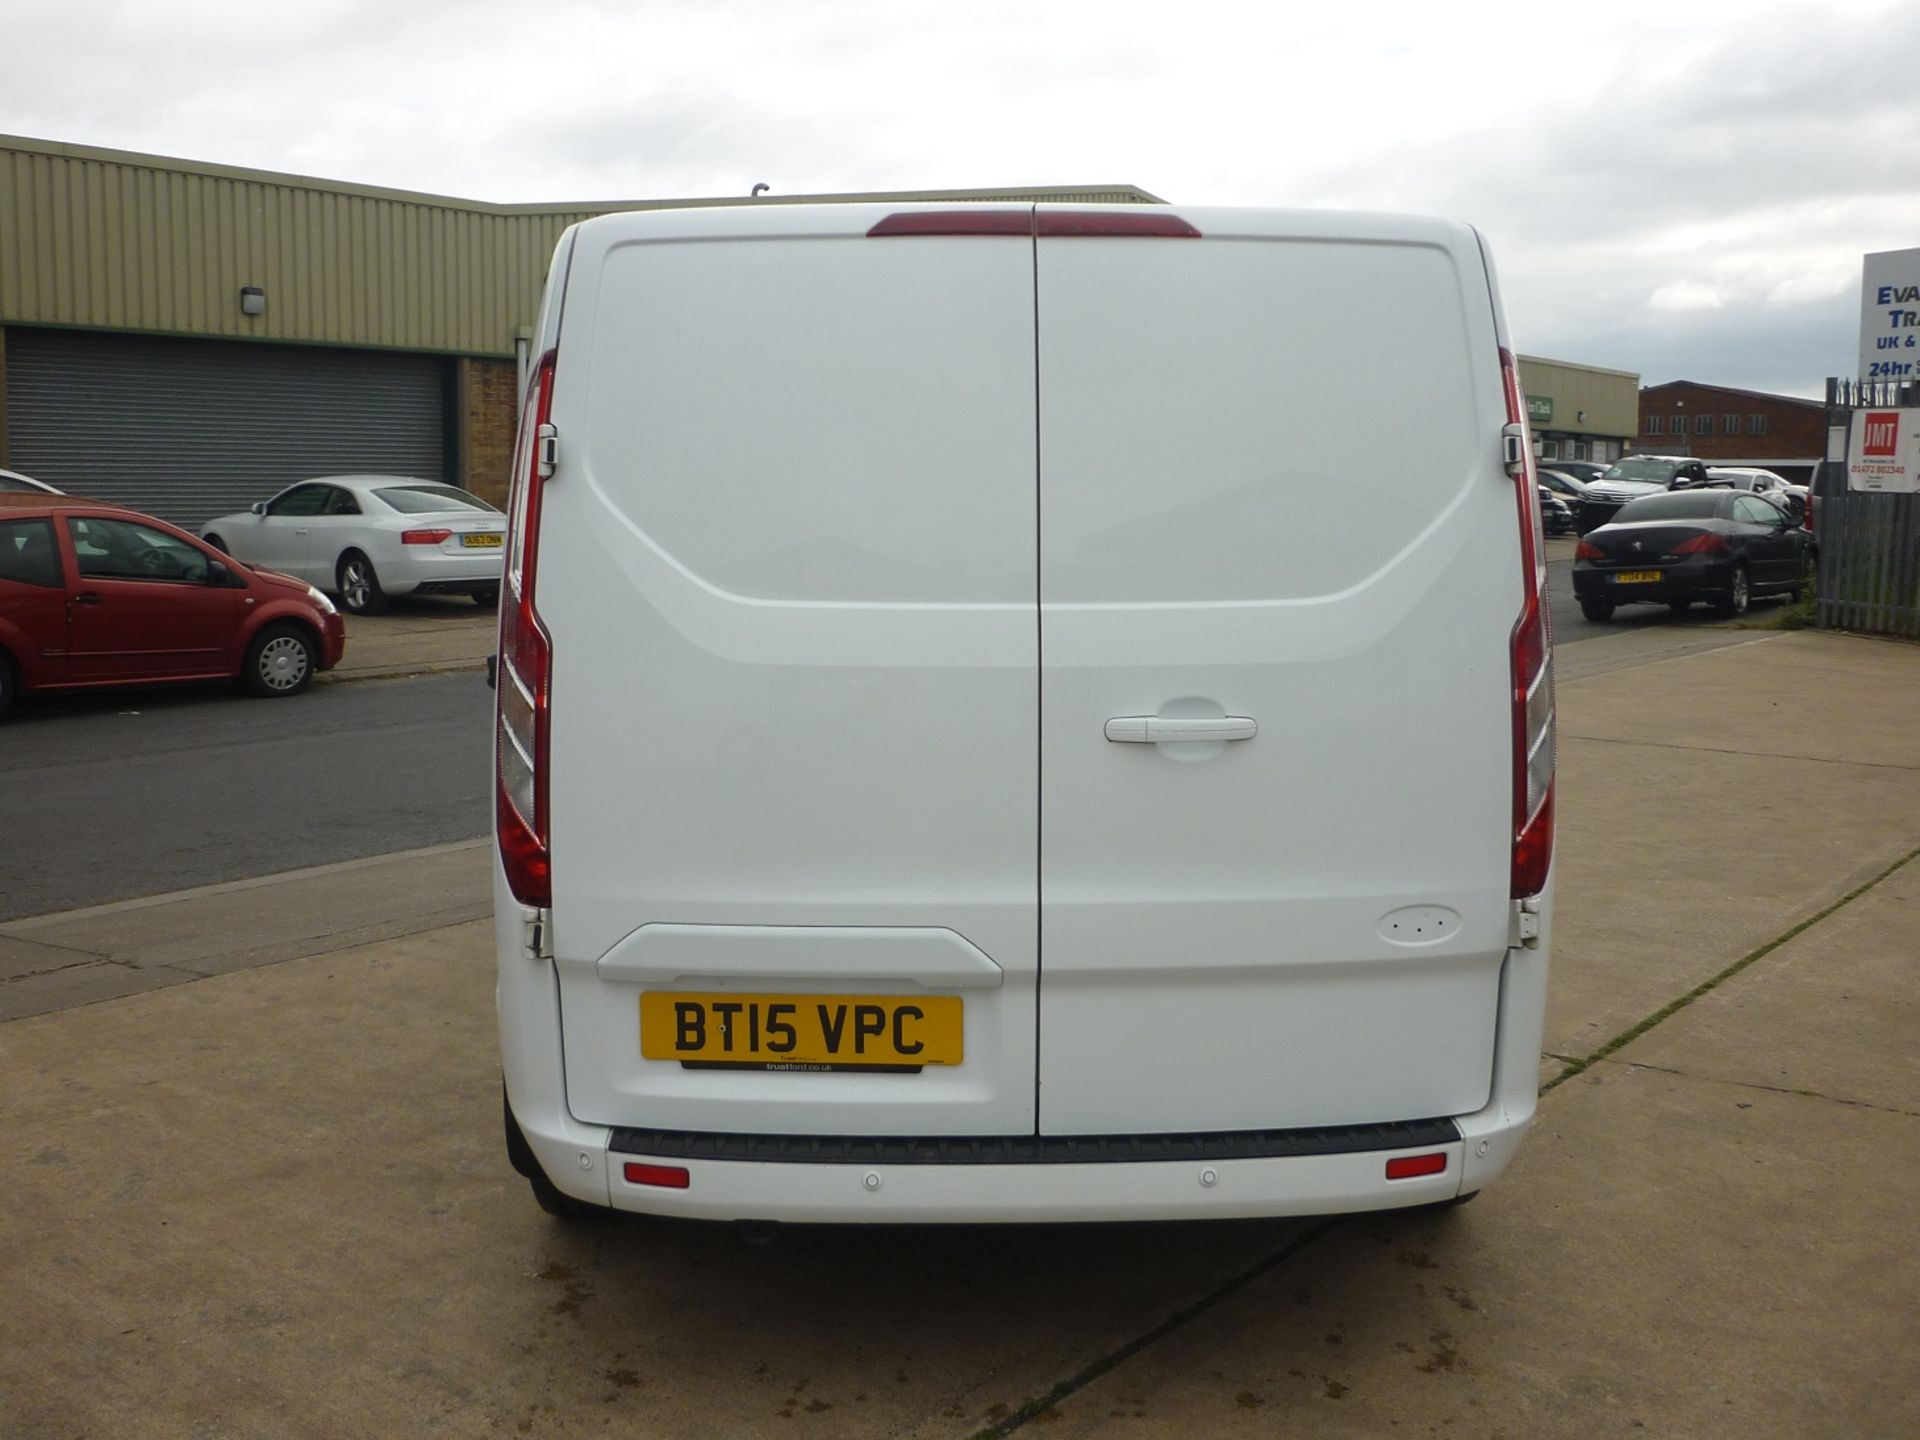 2015/15 REG FORD TRANSIT CUSTOM 270 LIMITED EDITION 125PS DIESEL PANEL VAN, SHOWING 0 FORMER KEEPERS - Image 2 of 5